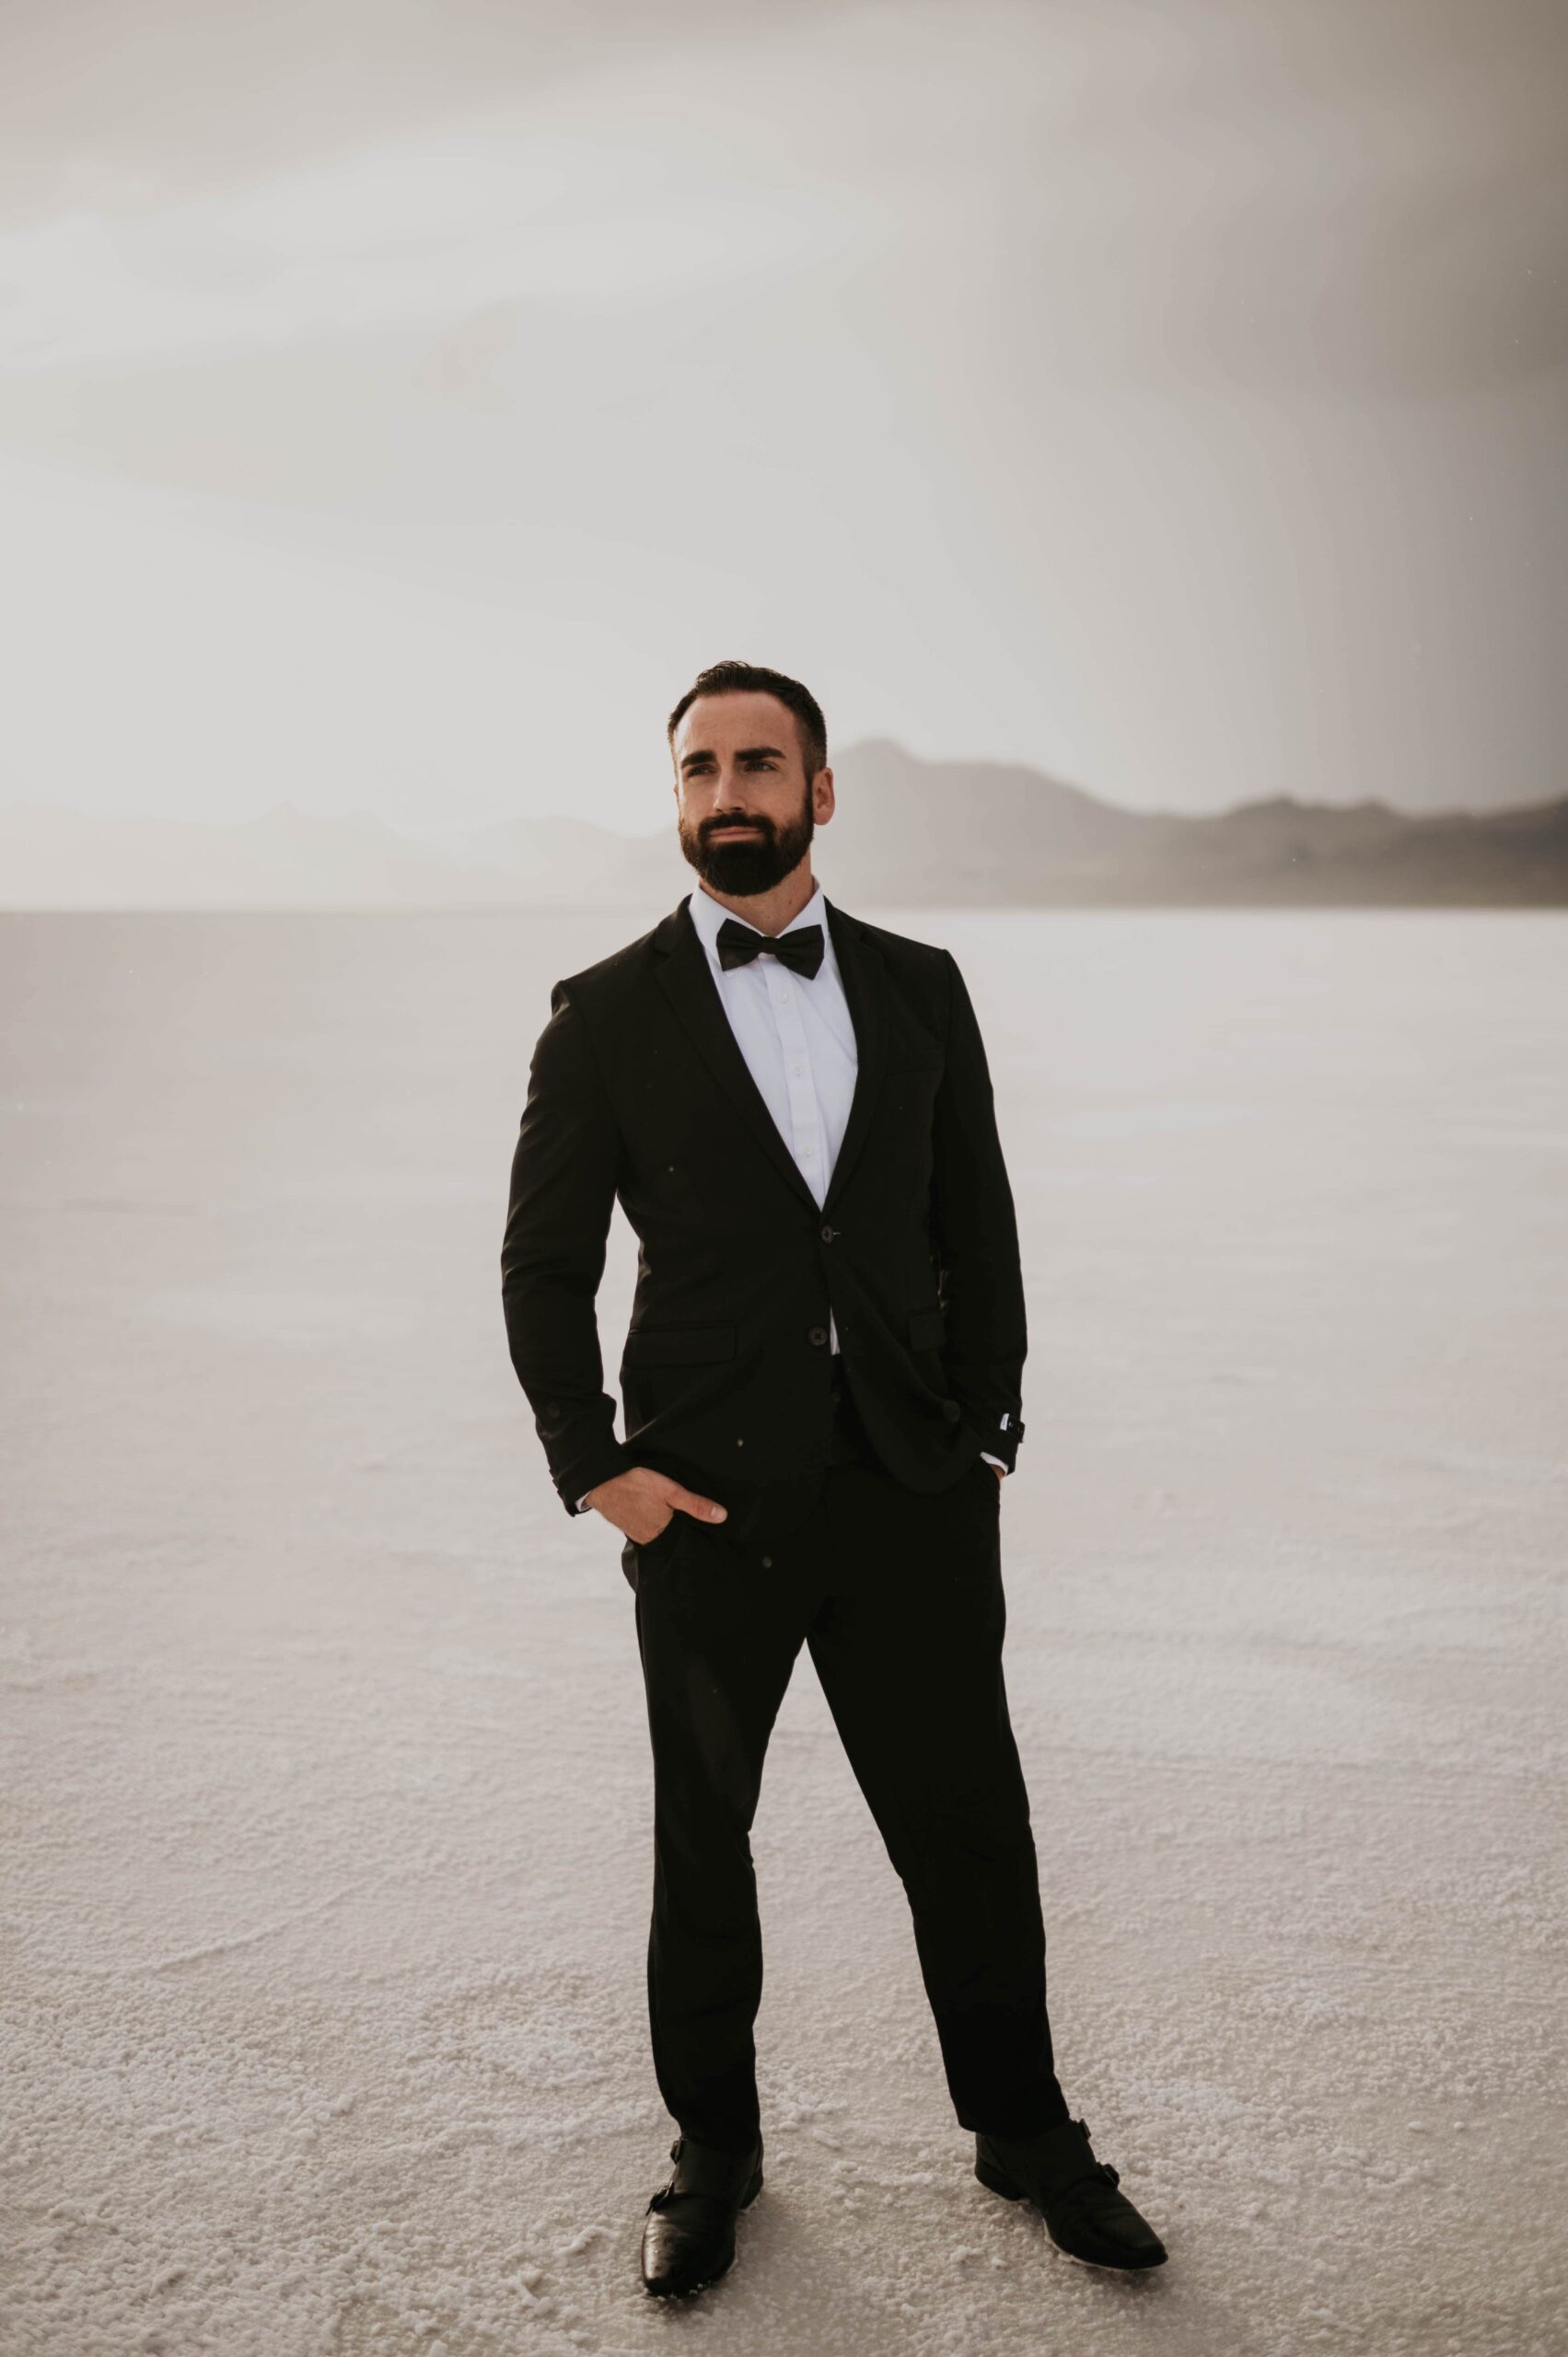 A man in a suit stands on the Salt Flats in Utah